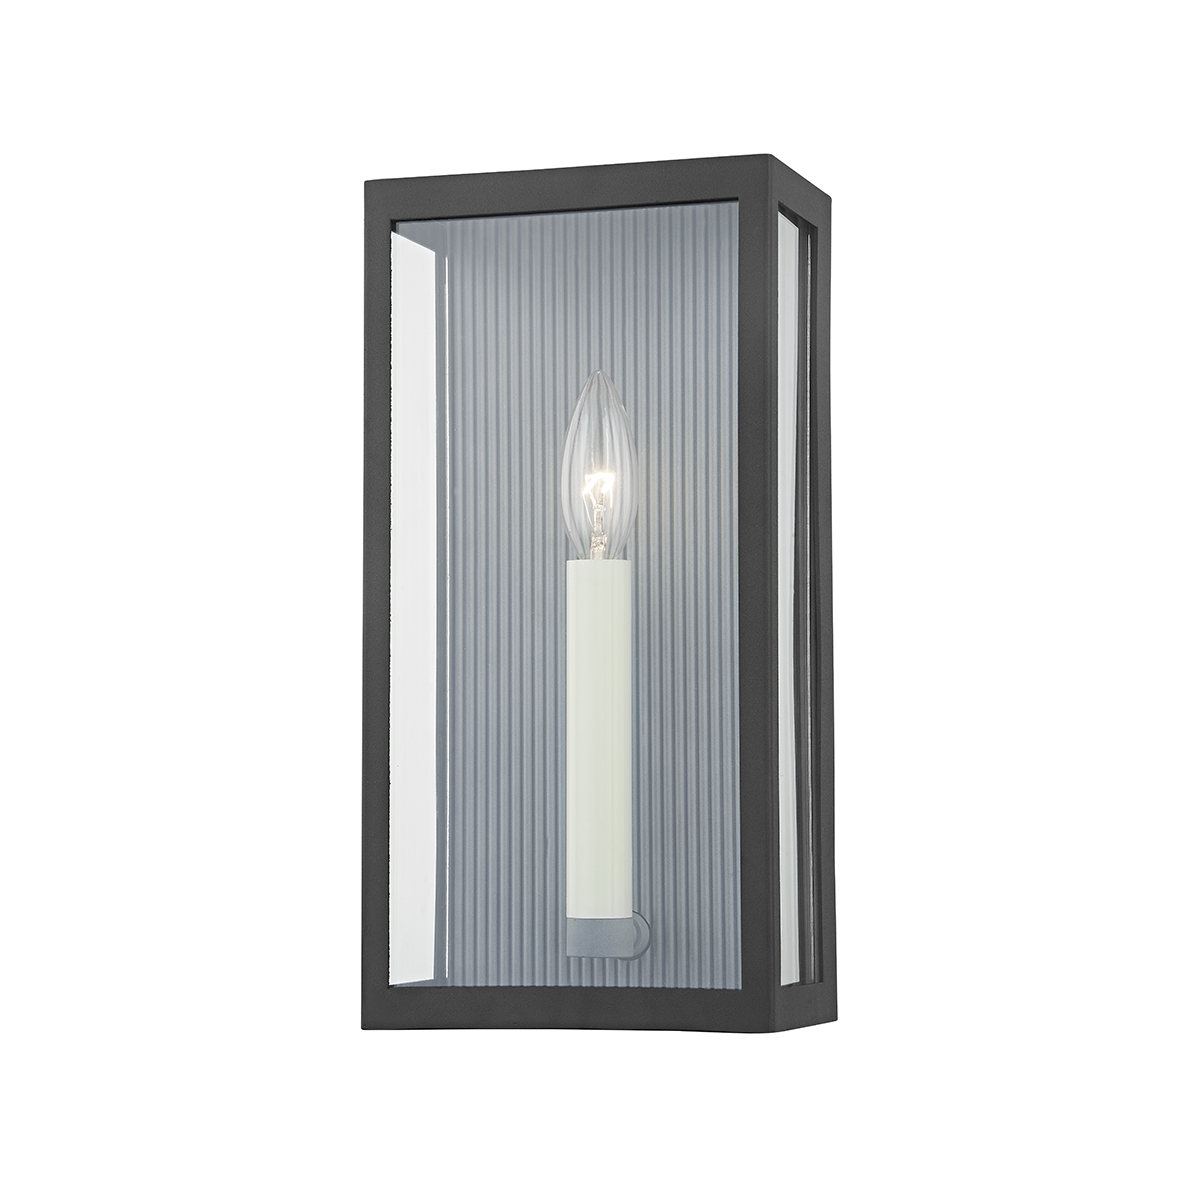 Troy VAIL 1 LIGHT EXTERIOR WALL SCONCE B1031 Outdoor l Wall Troy Lighting TEXTURE BLACK/WEATHERED ZINC  